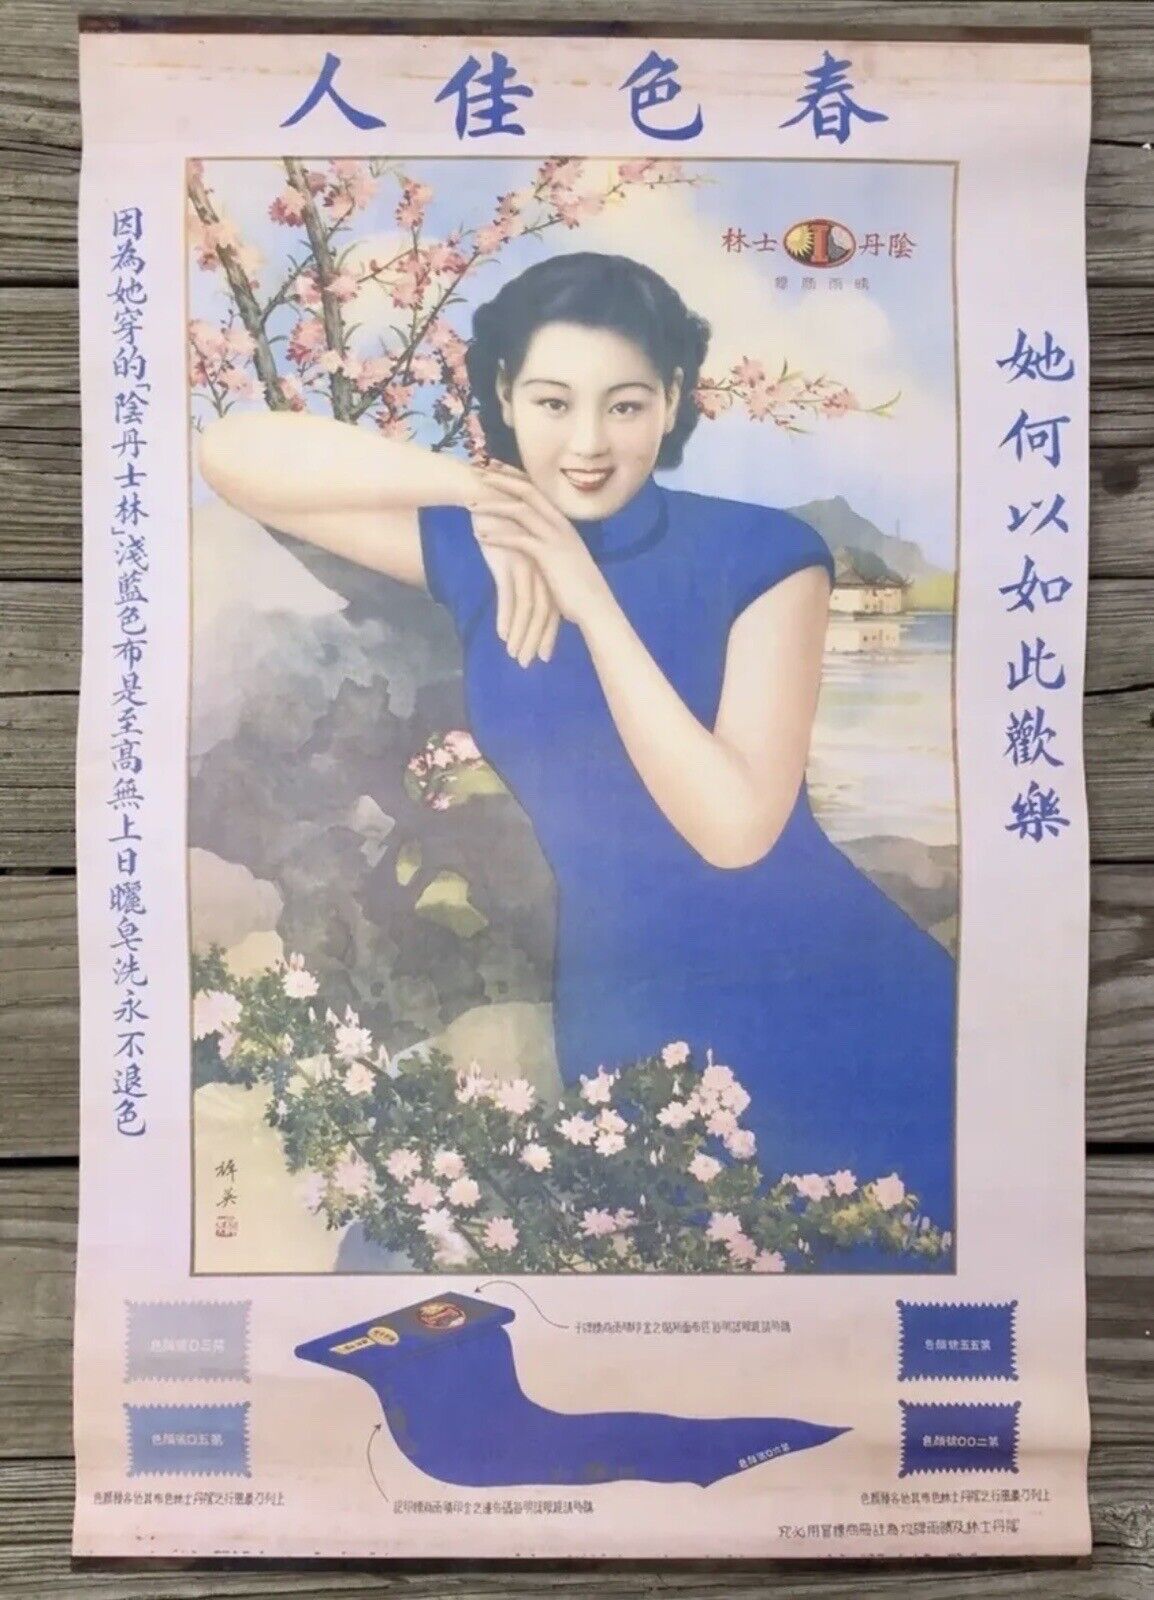 Chinese Woman for Blue Fabric/Linen Vintage Advertising Poster, 31” x 19.5”